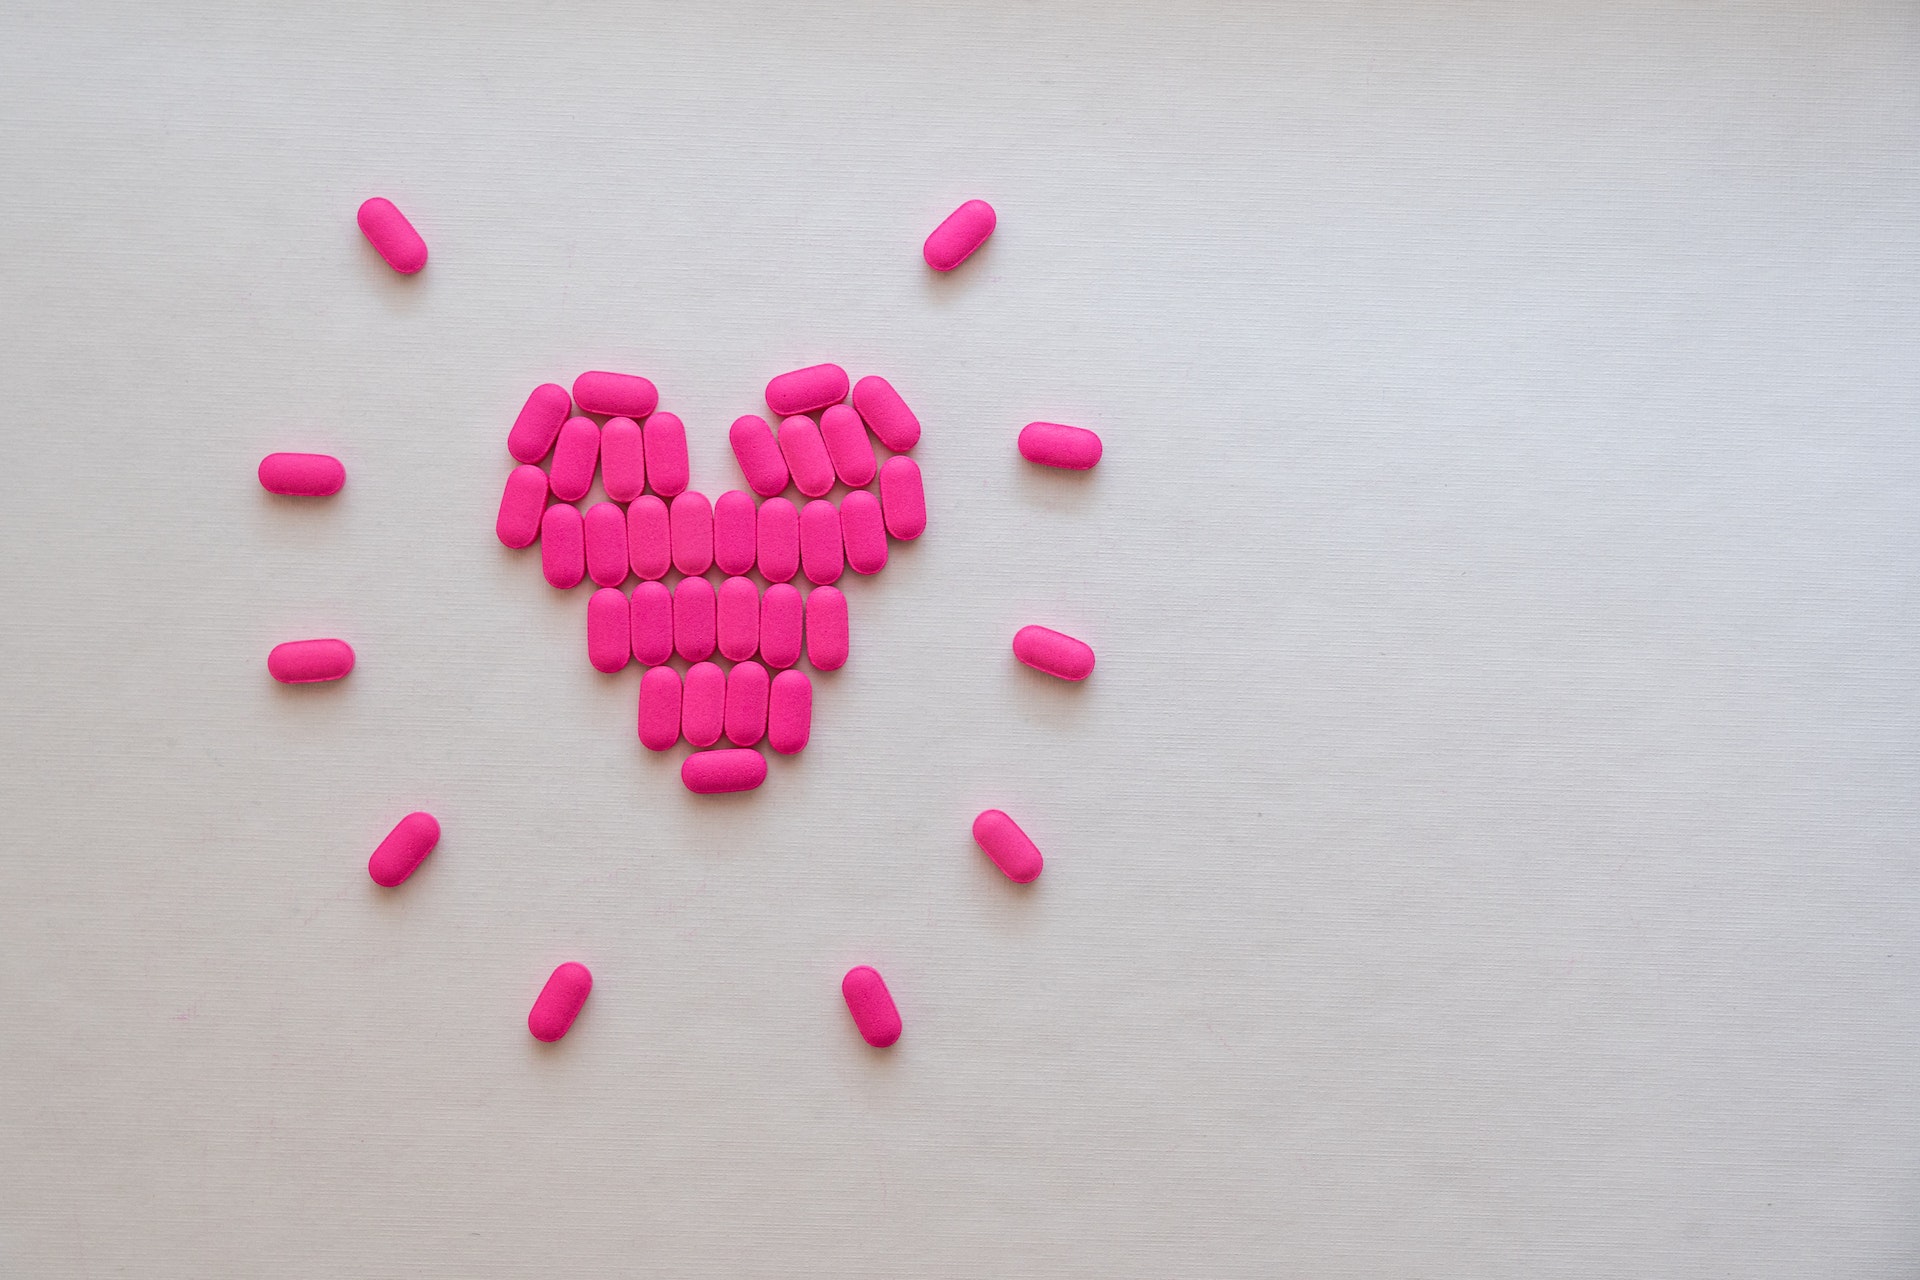 pink pills forming the shape of a heart